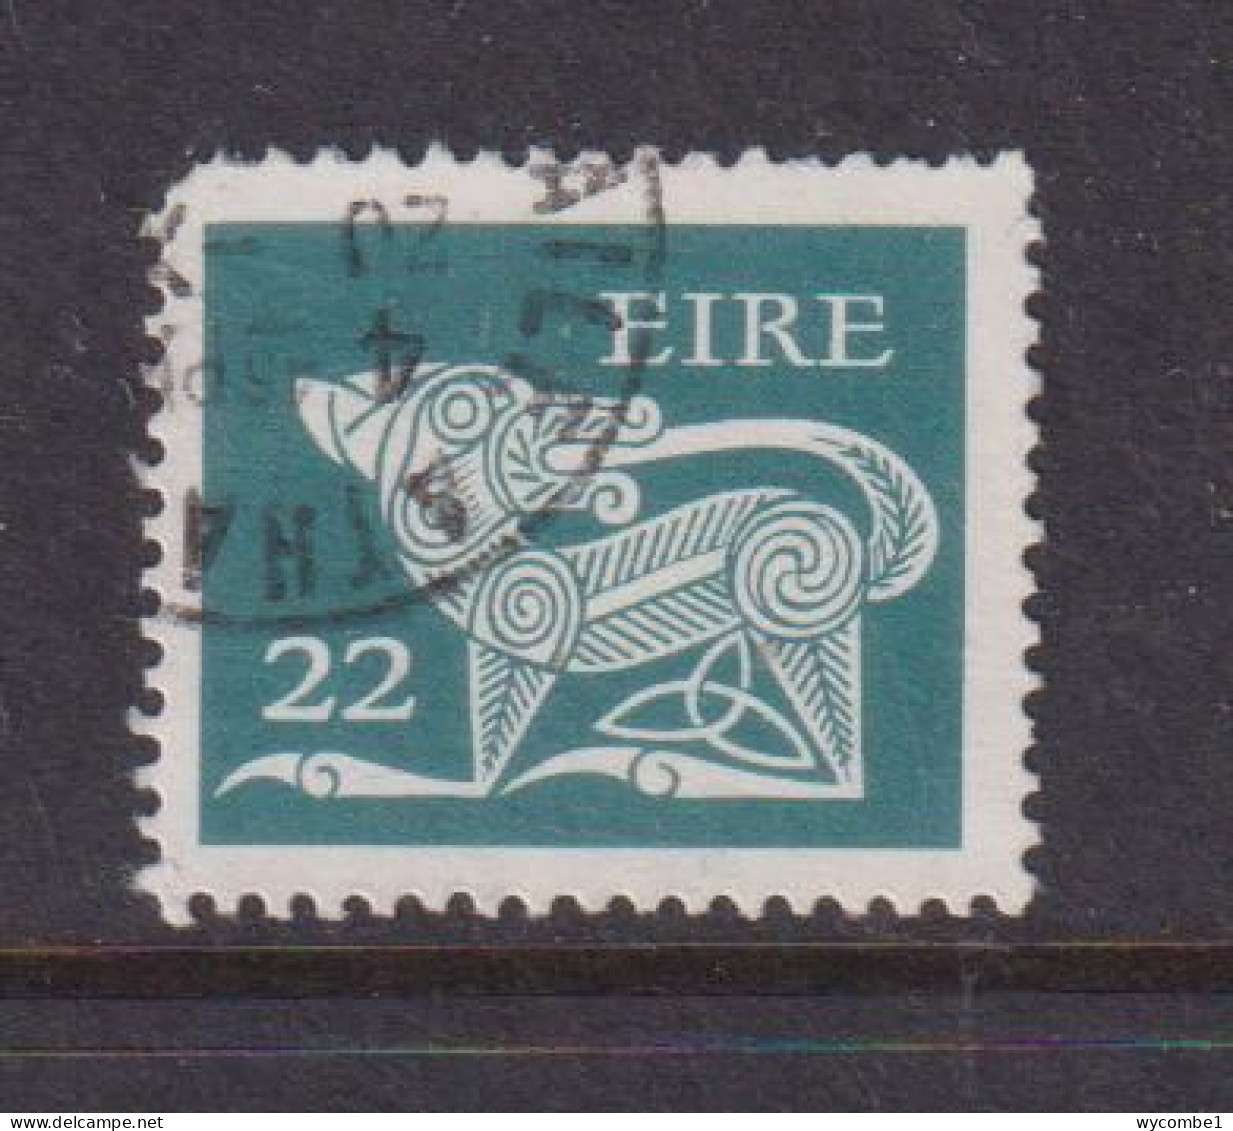 IRELAND - 1971  Decimal Currency Definitives 22p  Used As Scan - Gebraucht